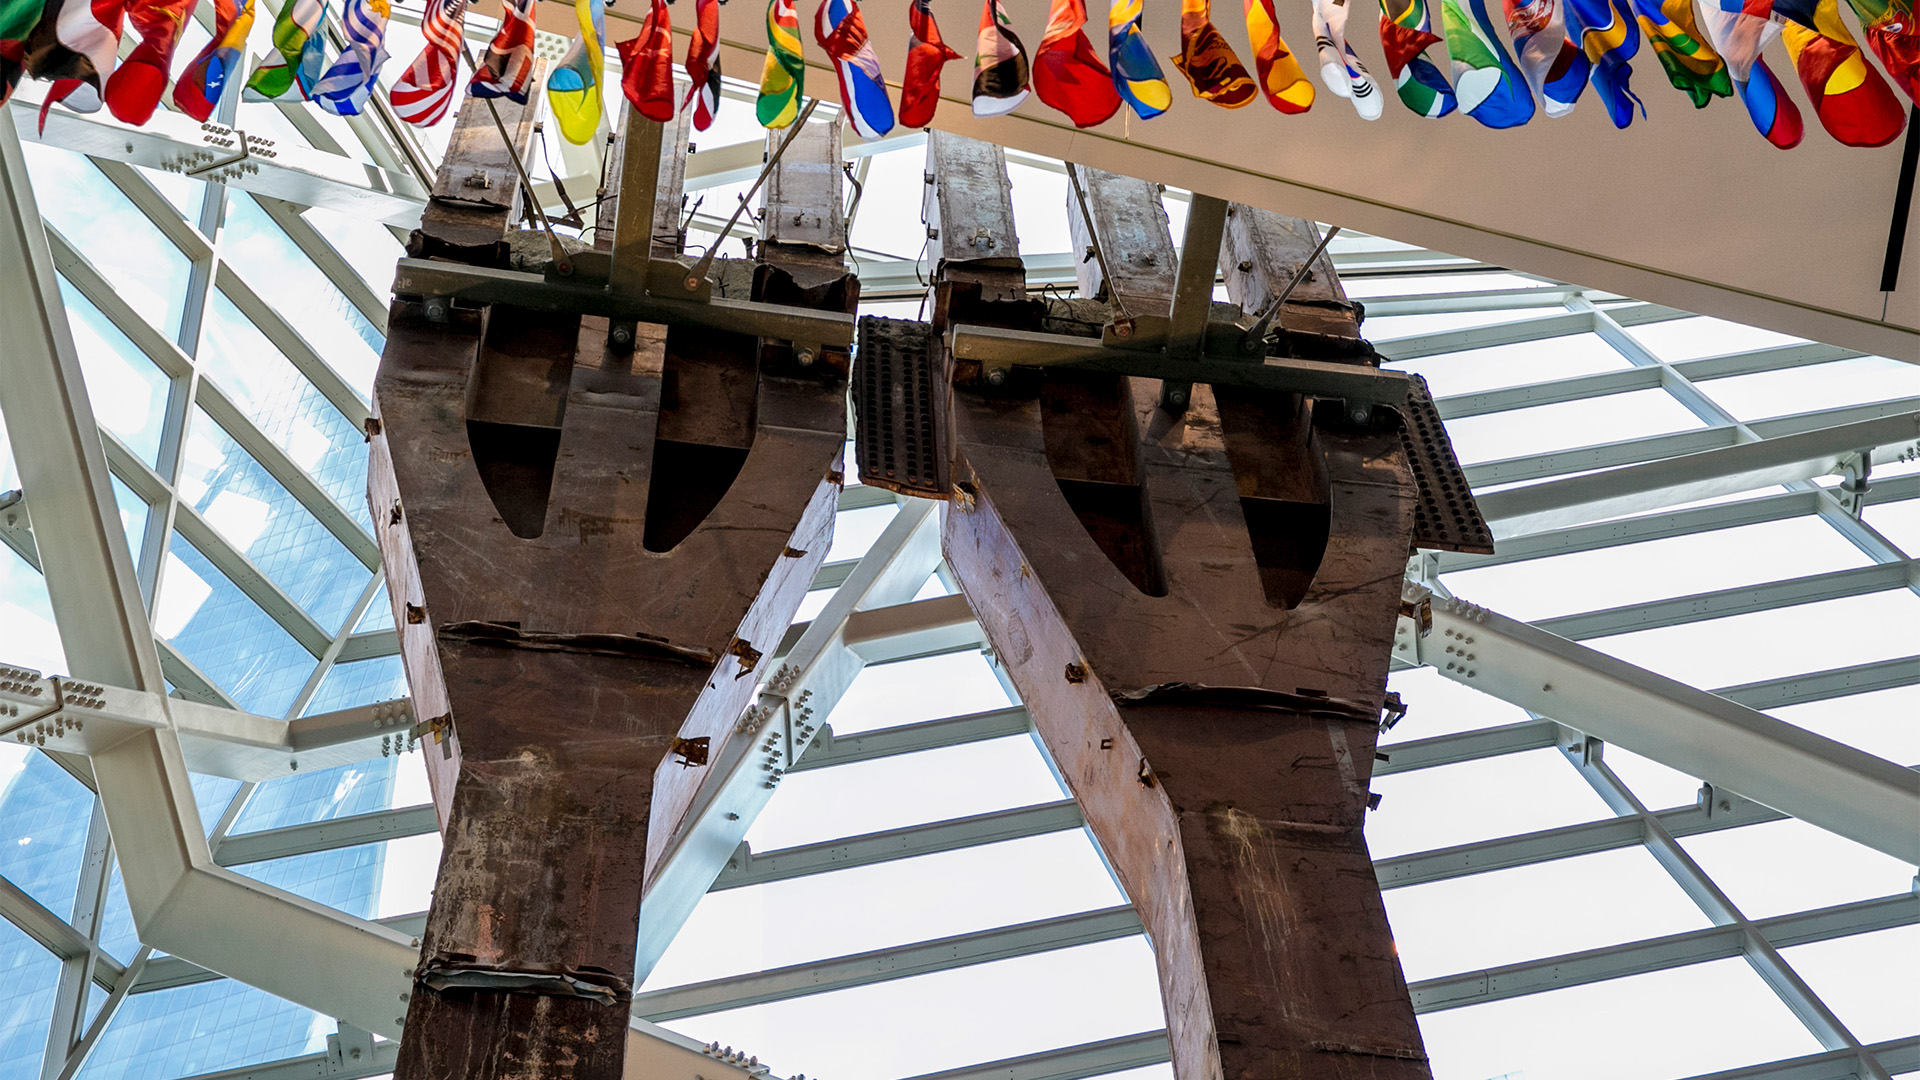 Steel tridents against glass Museum wall bordered by flags from around the world